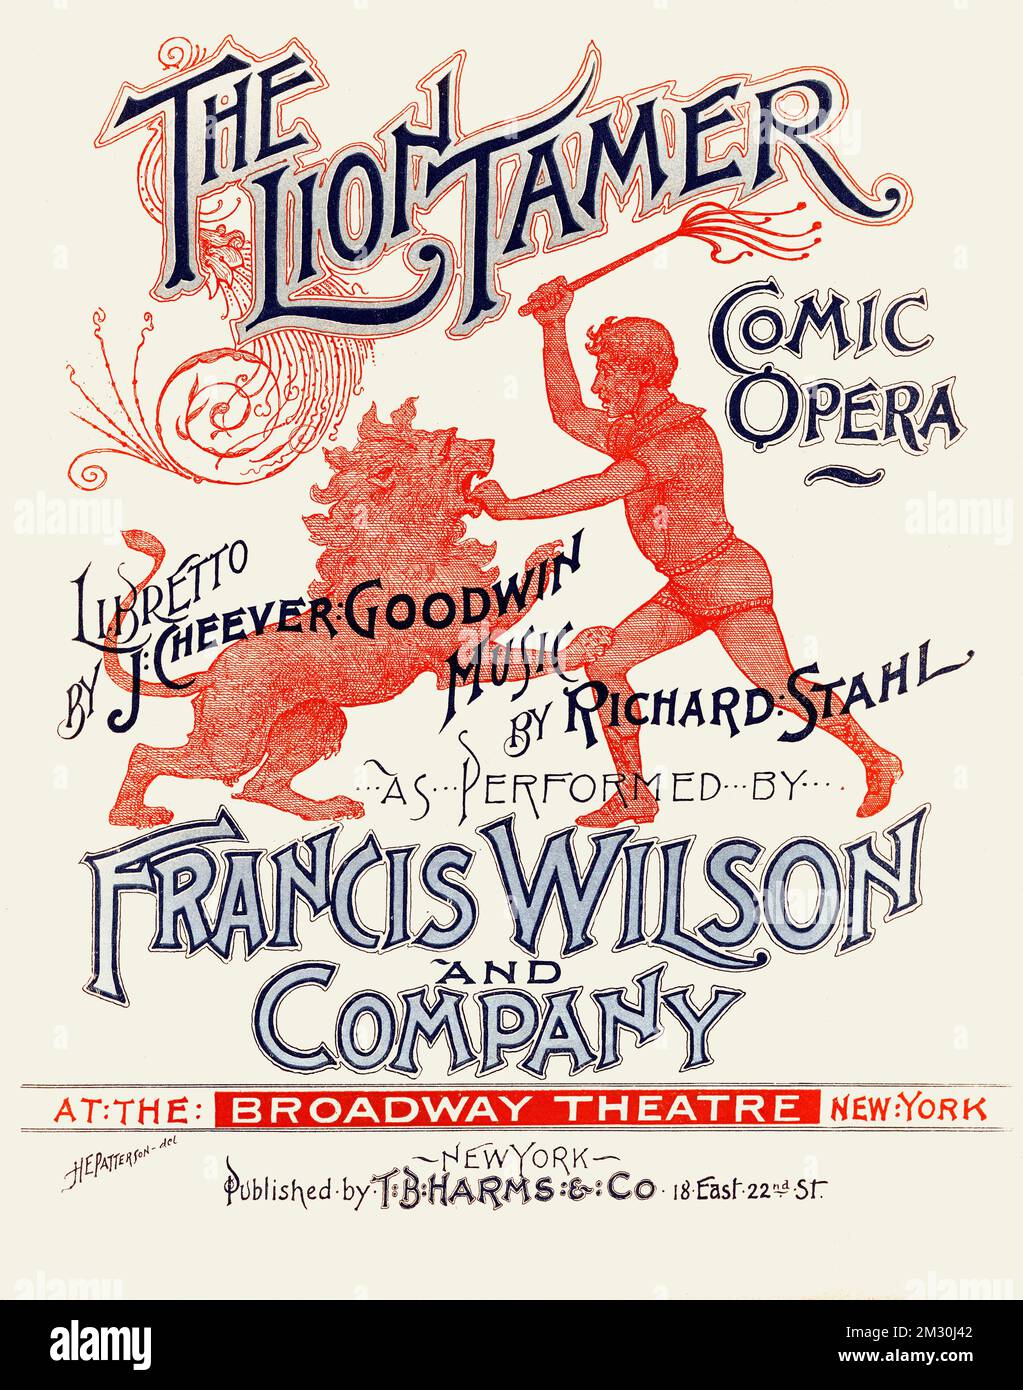 The Lion Tamer Comic Opera Francis Wilson and Company, notated music - sheet music book - retouched version Stock Photo